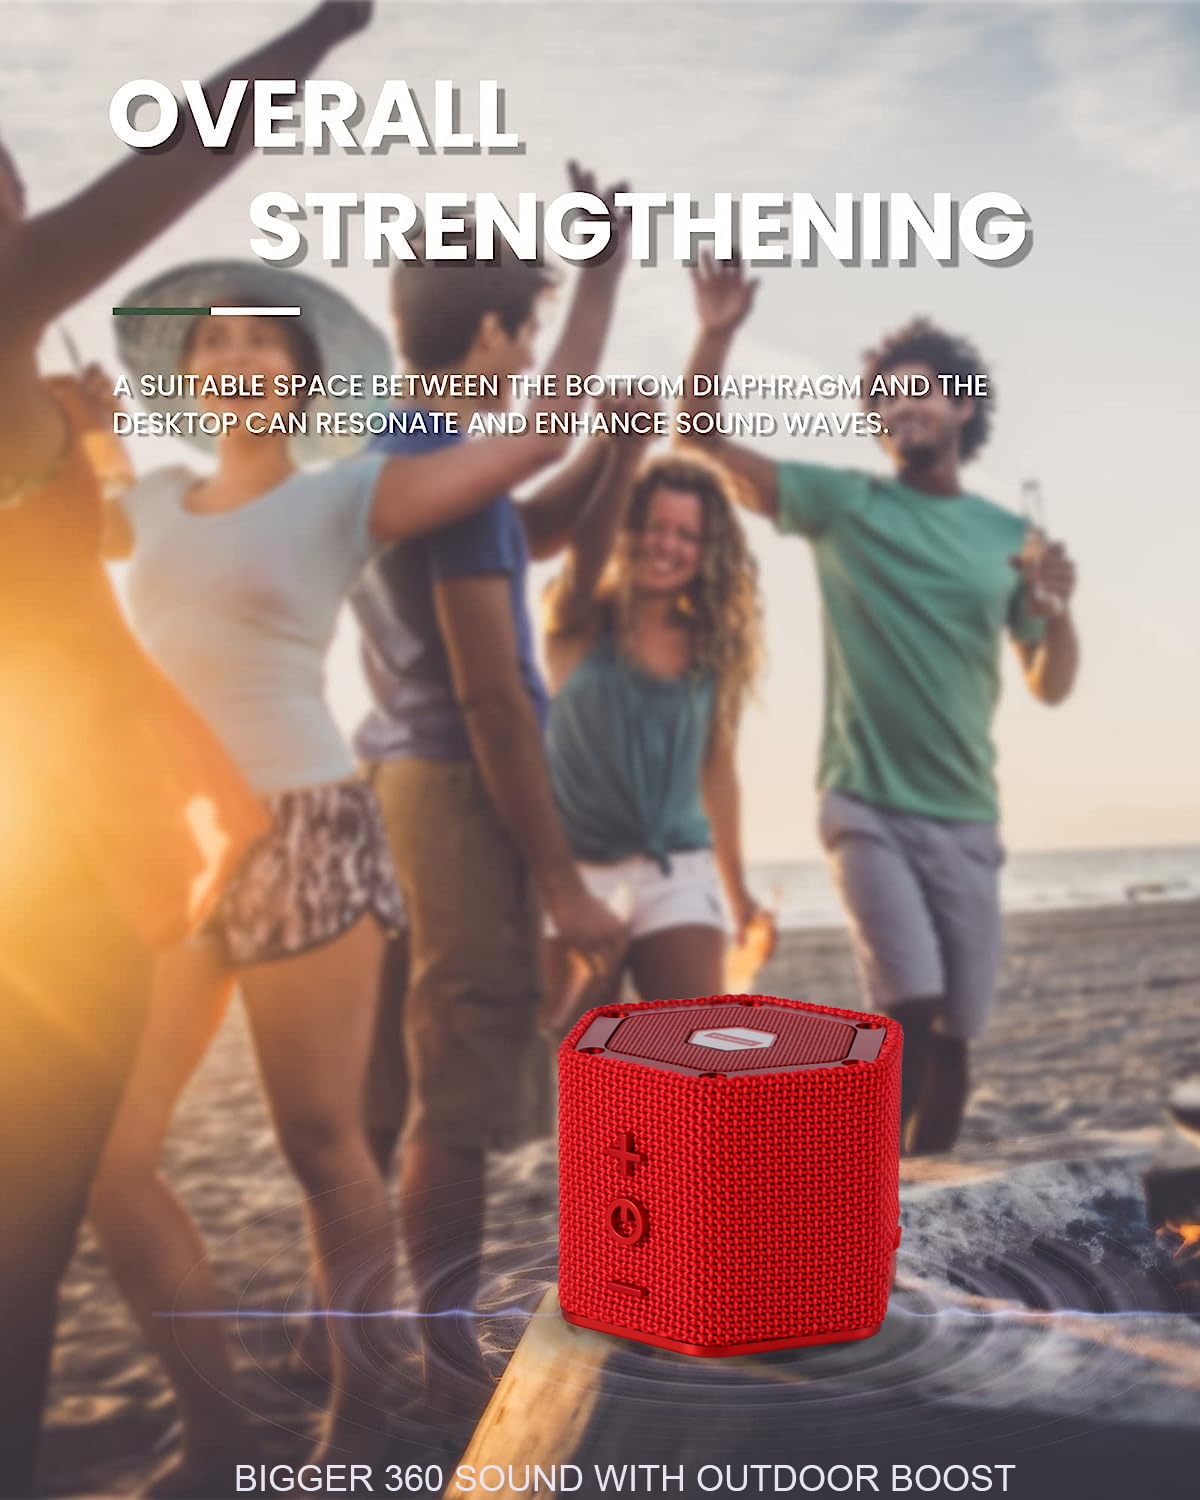 Speakers-Bluetooth-Speaker-Fully-Waterproof-Certified-IP68-Floating-Speaker-for-Indoor-and-Outdoor-Use-Perfect-For-The-Beach-Pool-Or-Shower-14